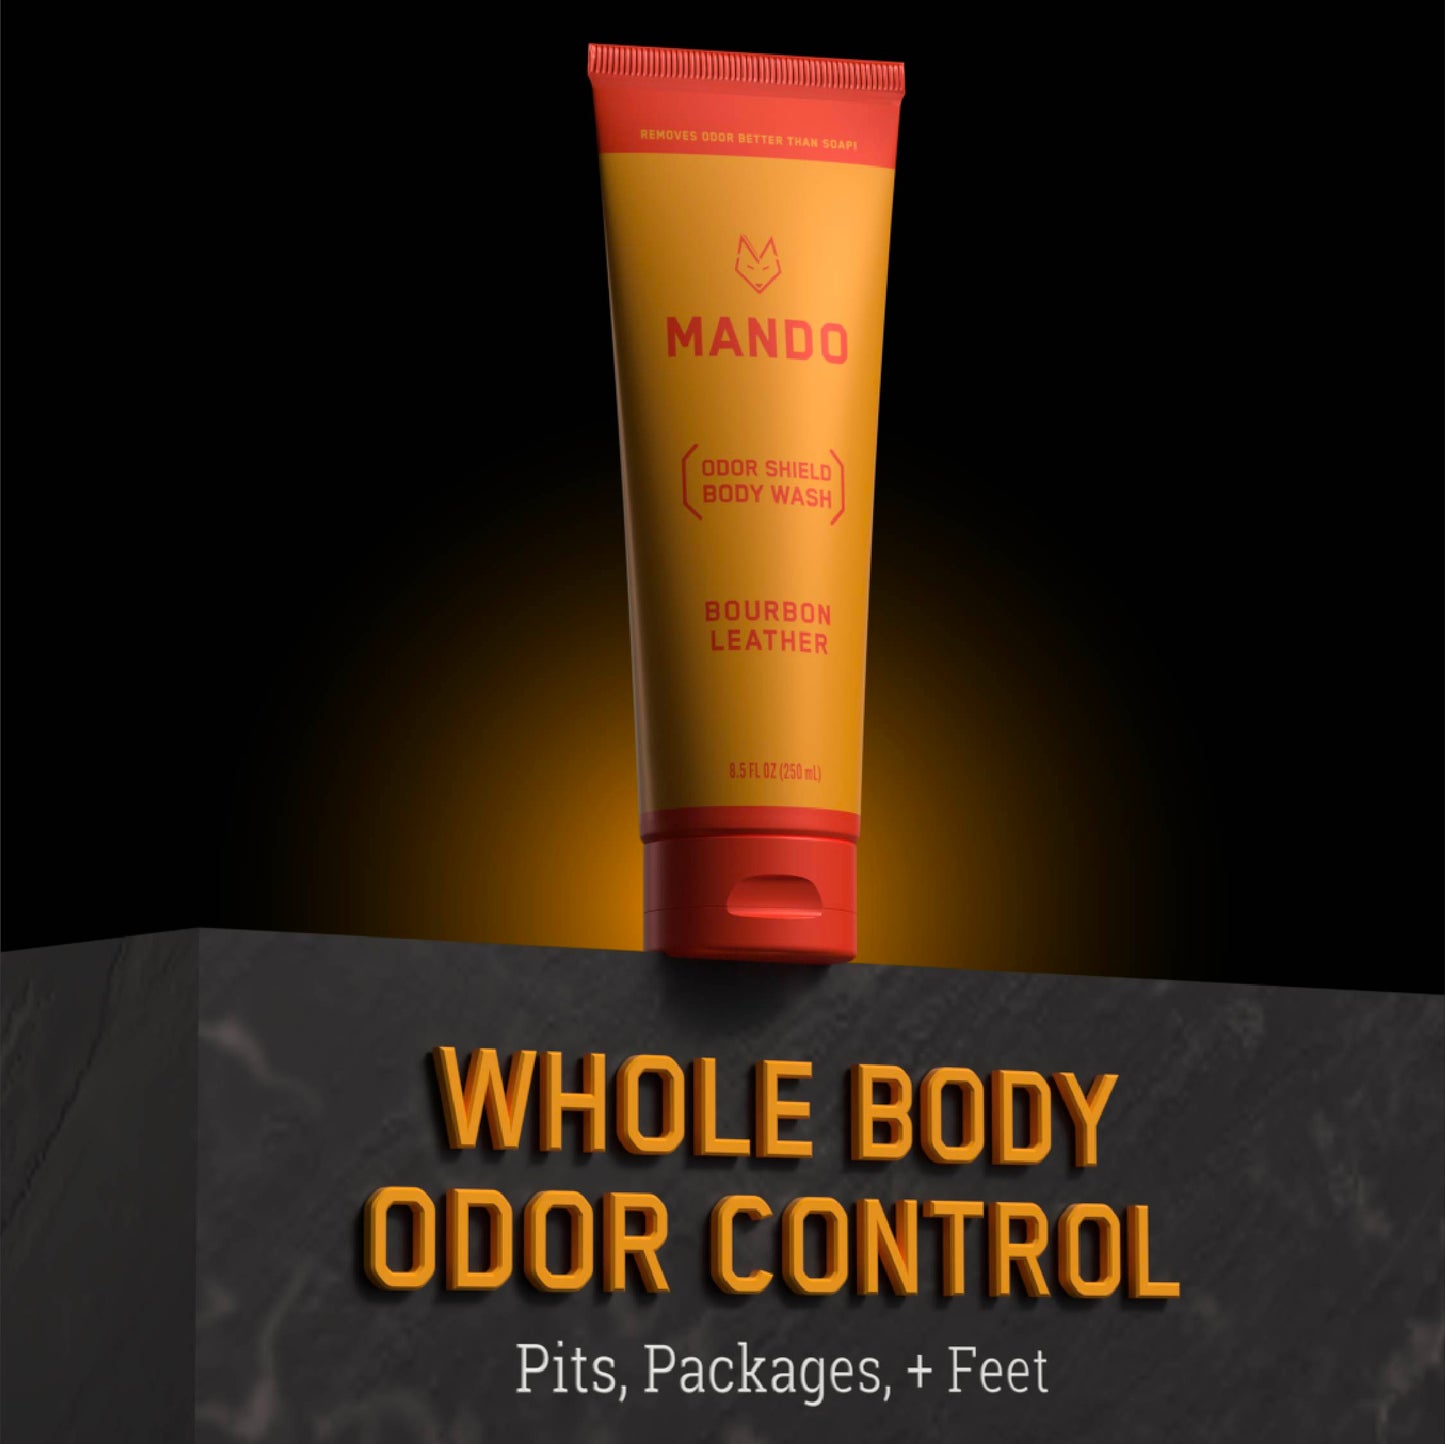 yellow orange tube of Mando body wash in bourbon leather scent with text: whole body odor control, pits, packages + feet